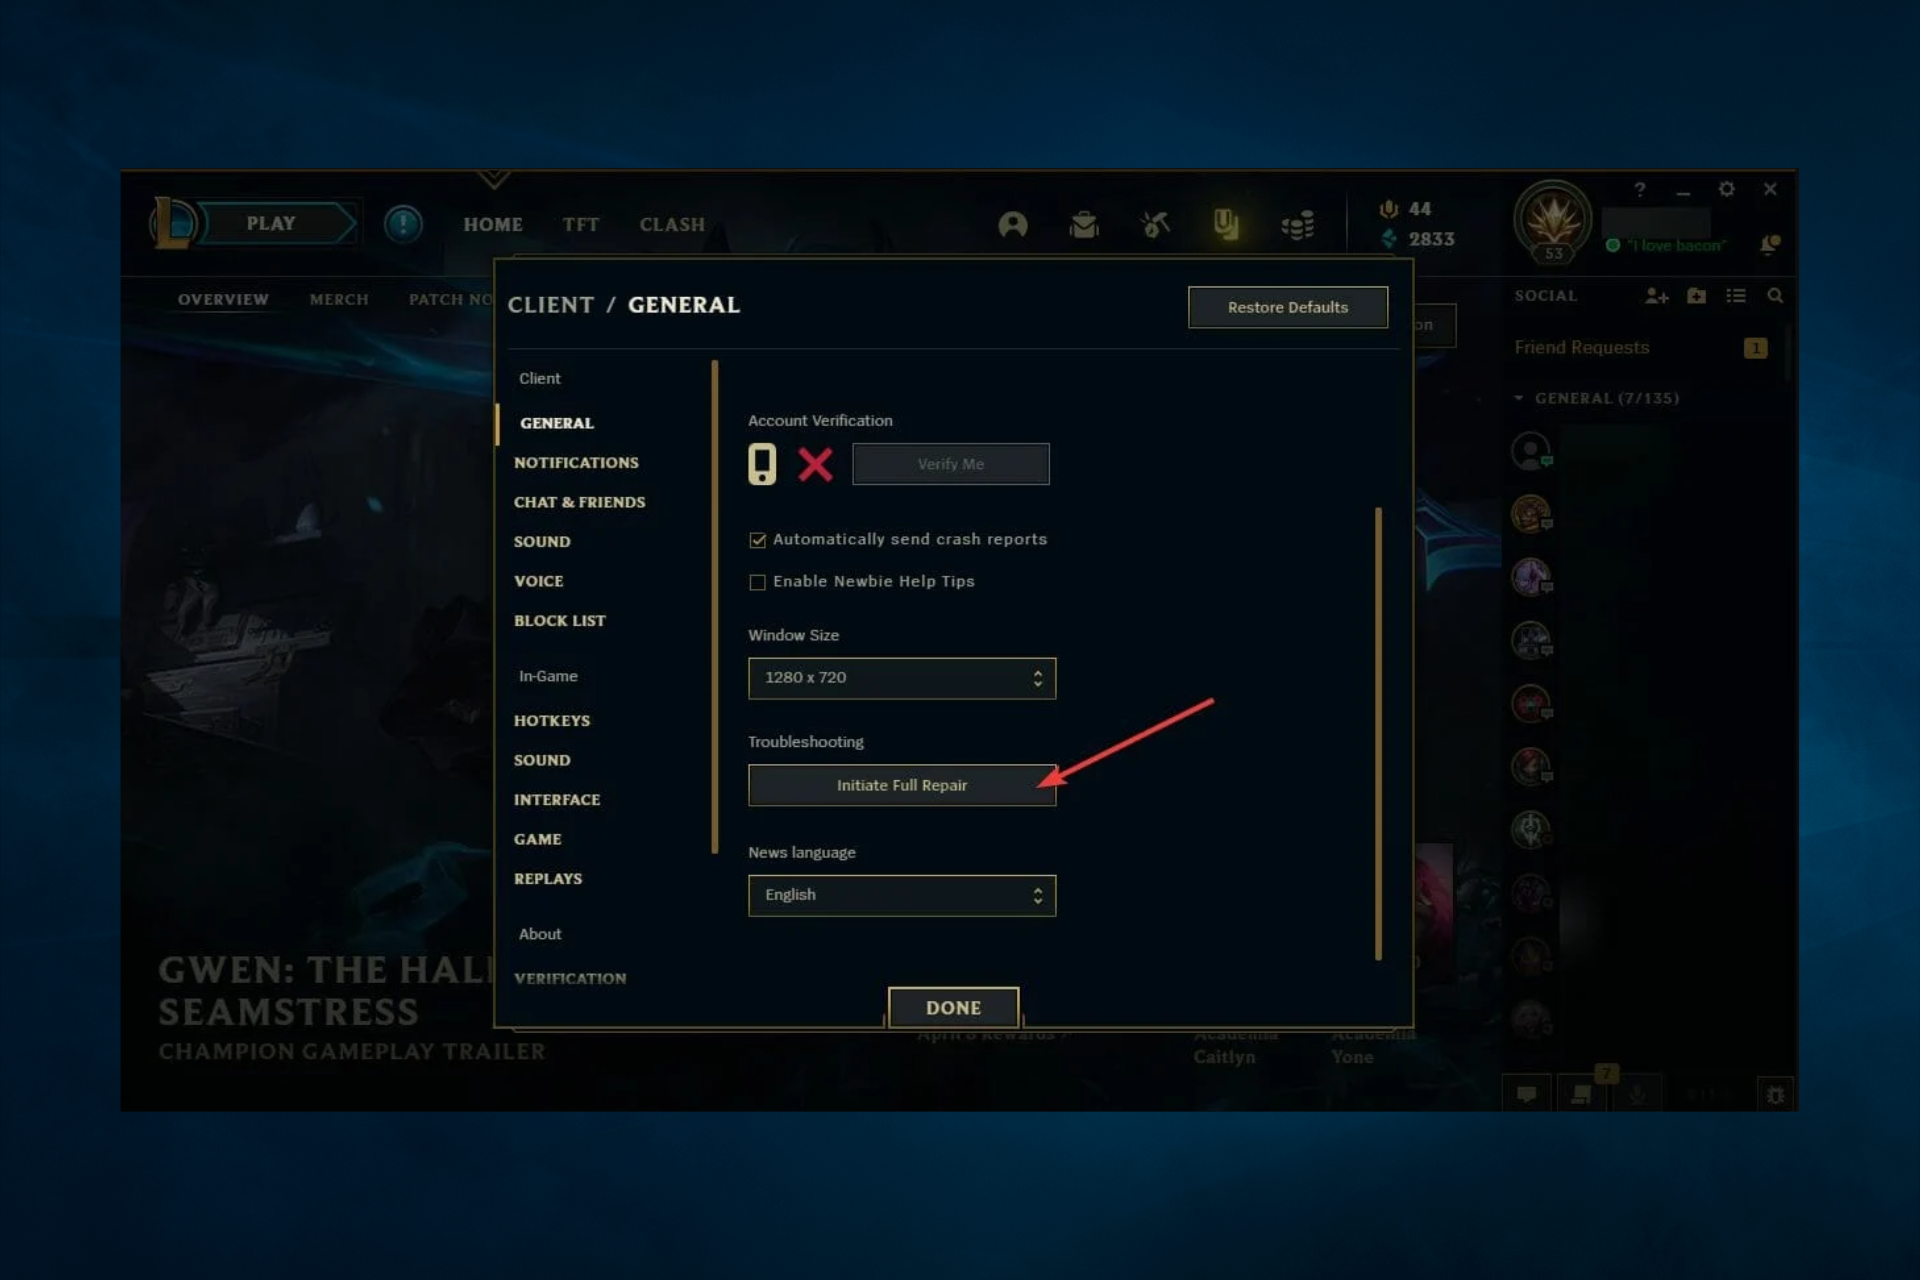 League of Legends Downloading too Slow [Fixes]